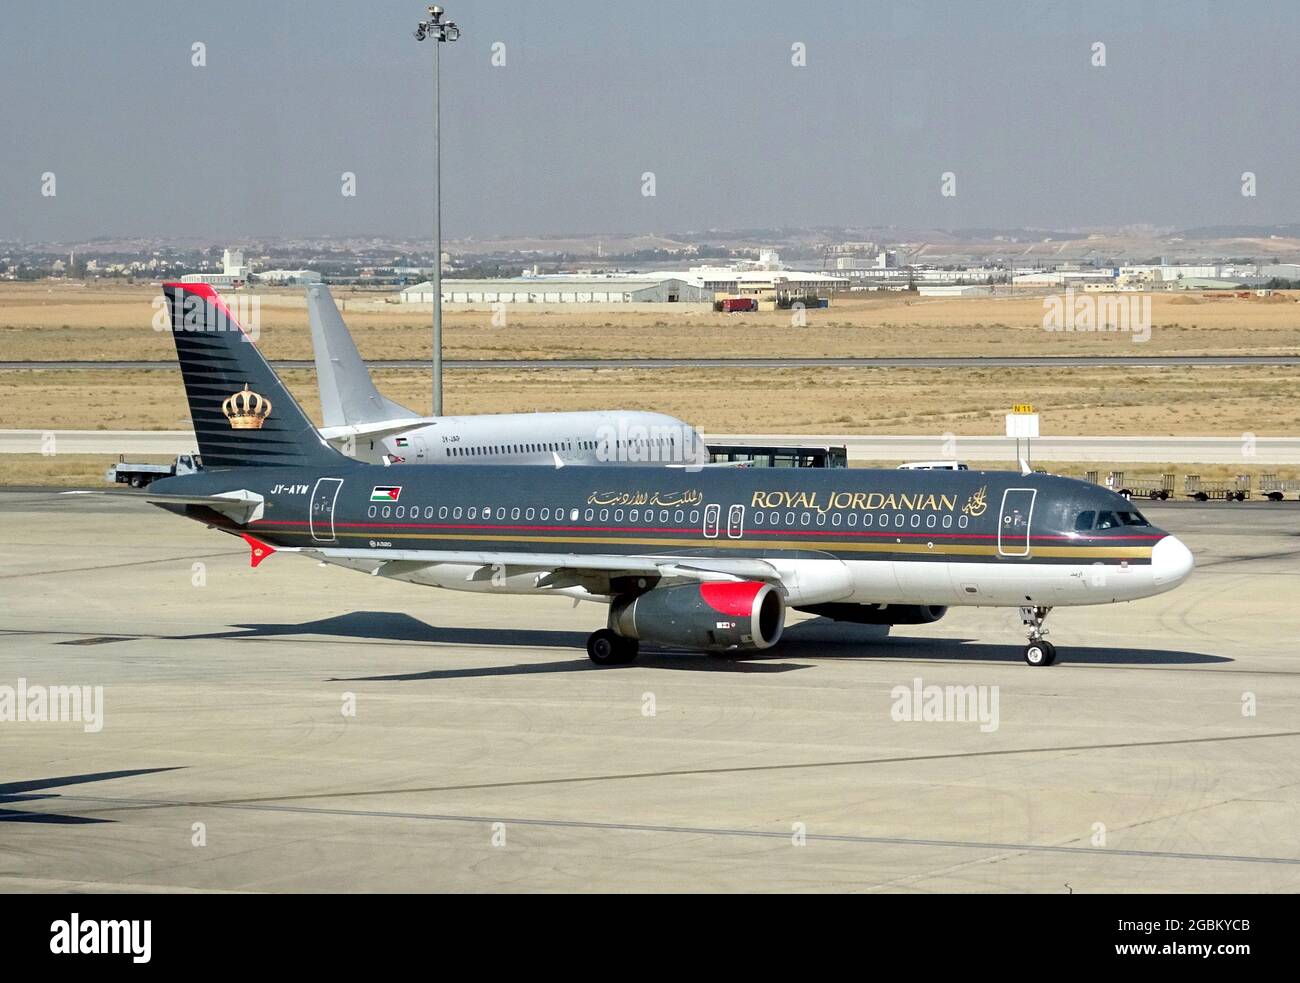 Royal Jordanian Airlines (is the flag carrier airline of Jordan), Airbus  A320 airplane Stock Photo - Alamy